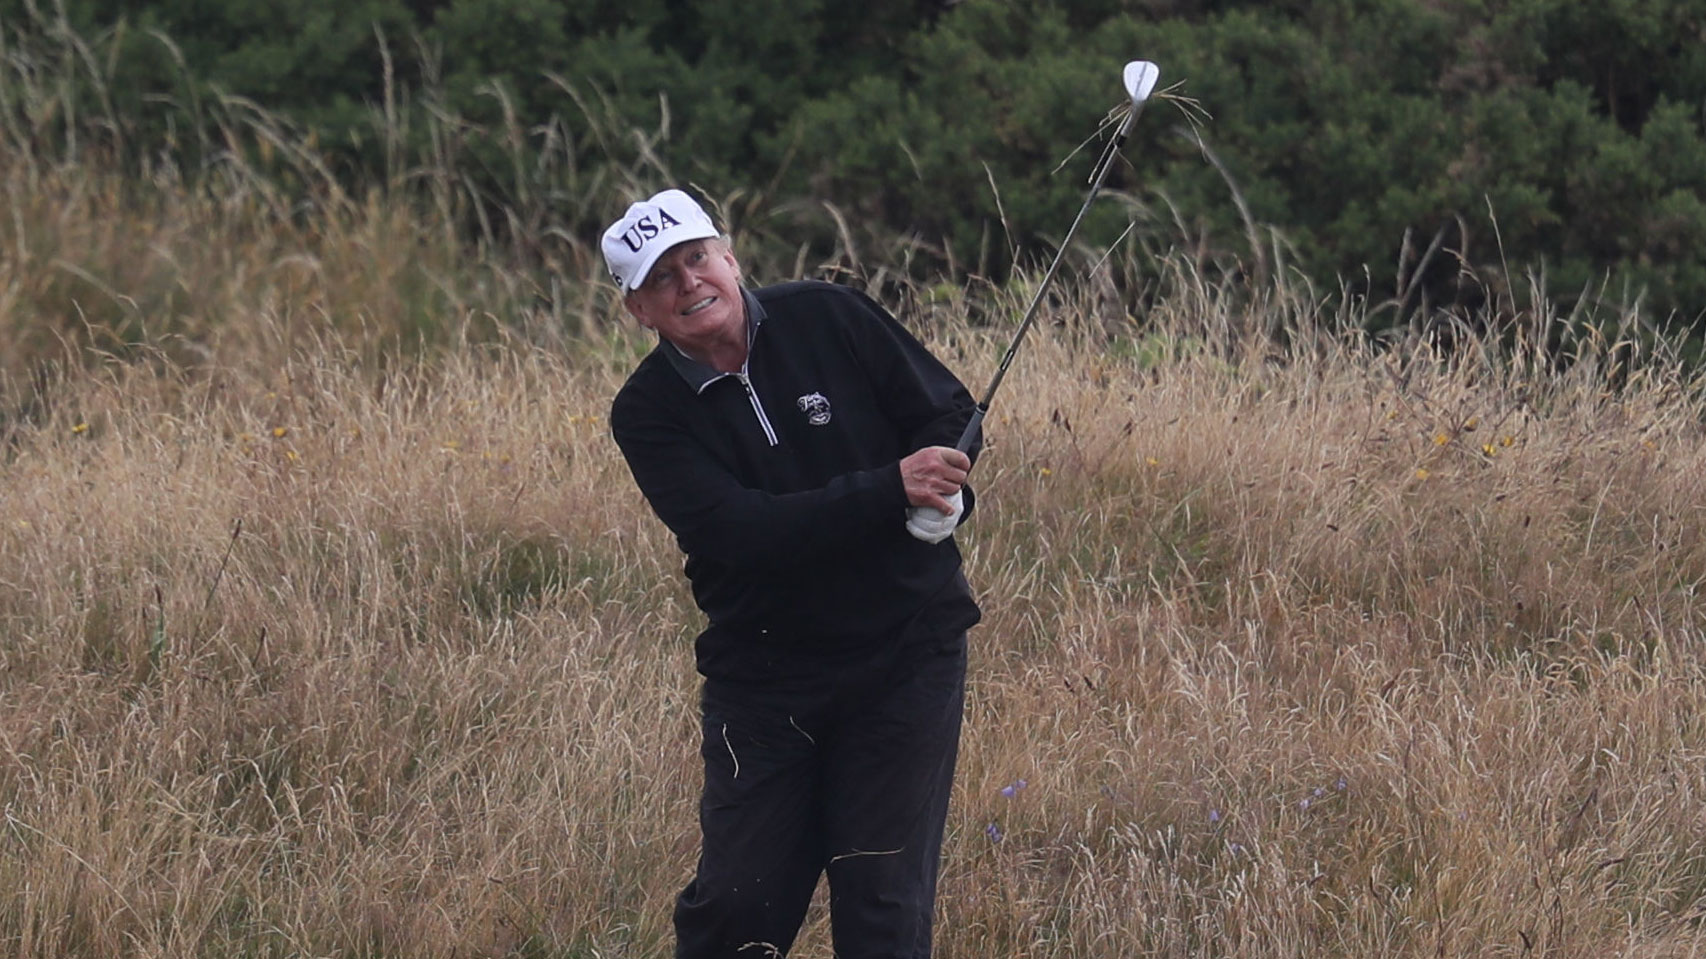 Donald Trump hits a shot during a game of golf.